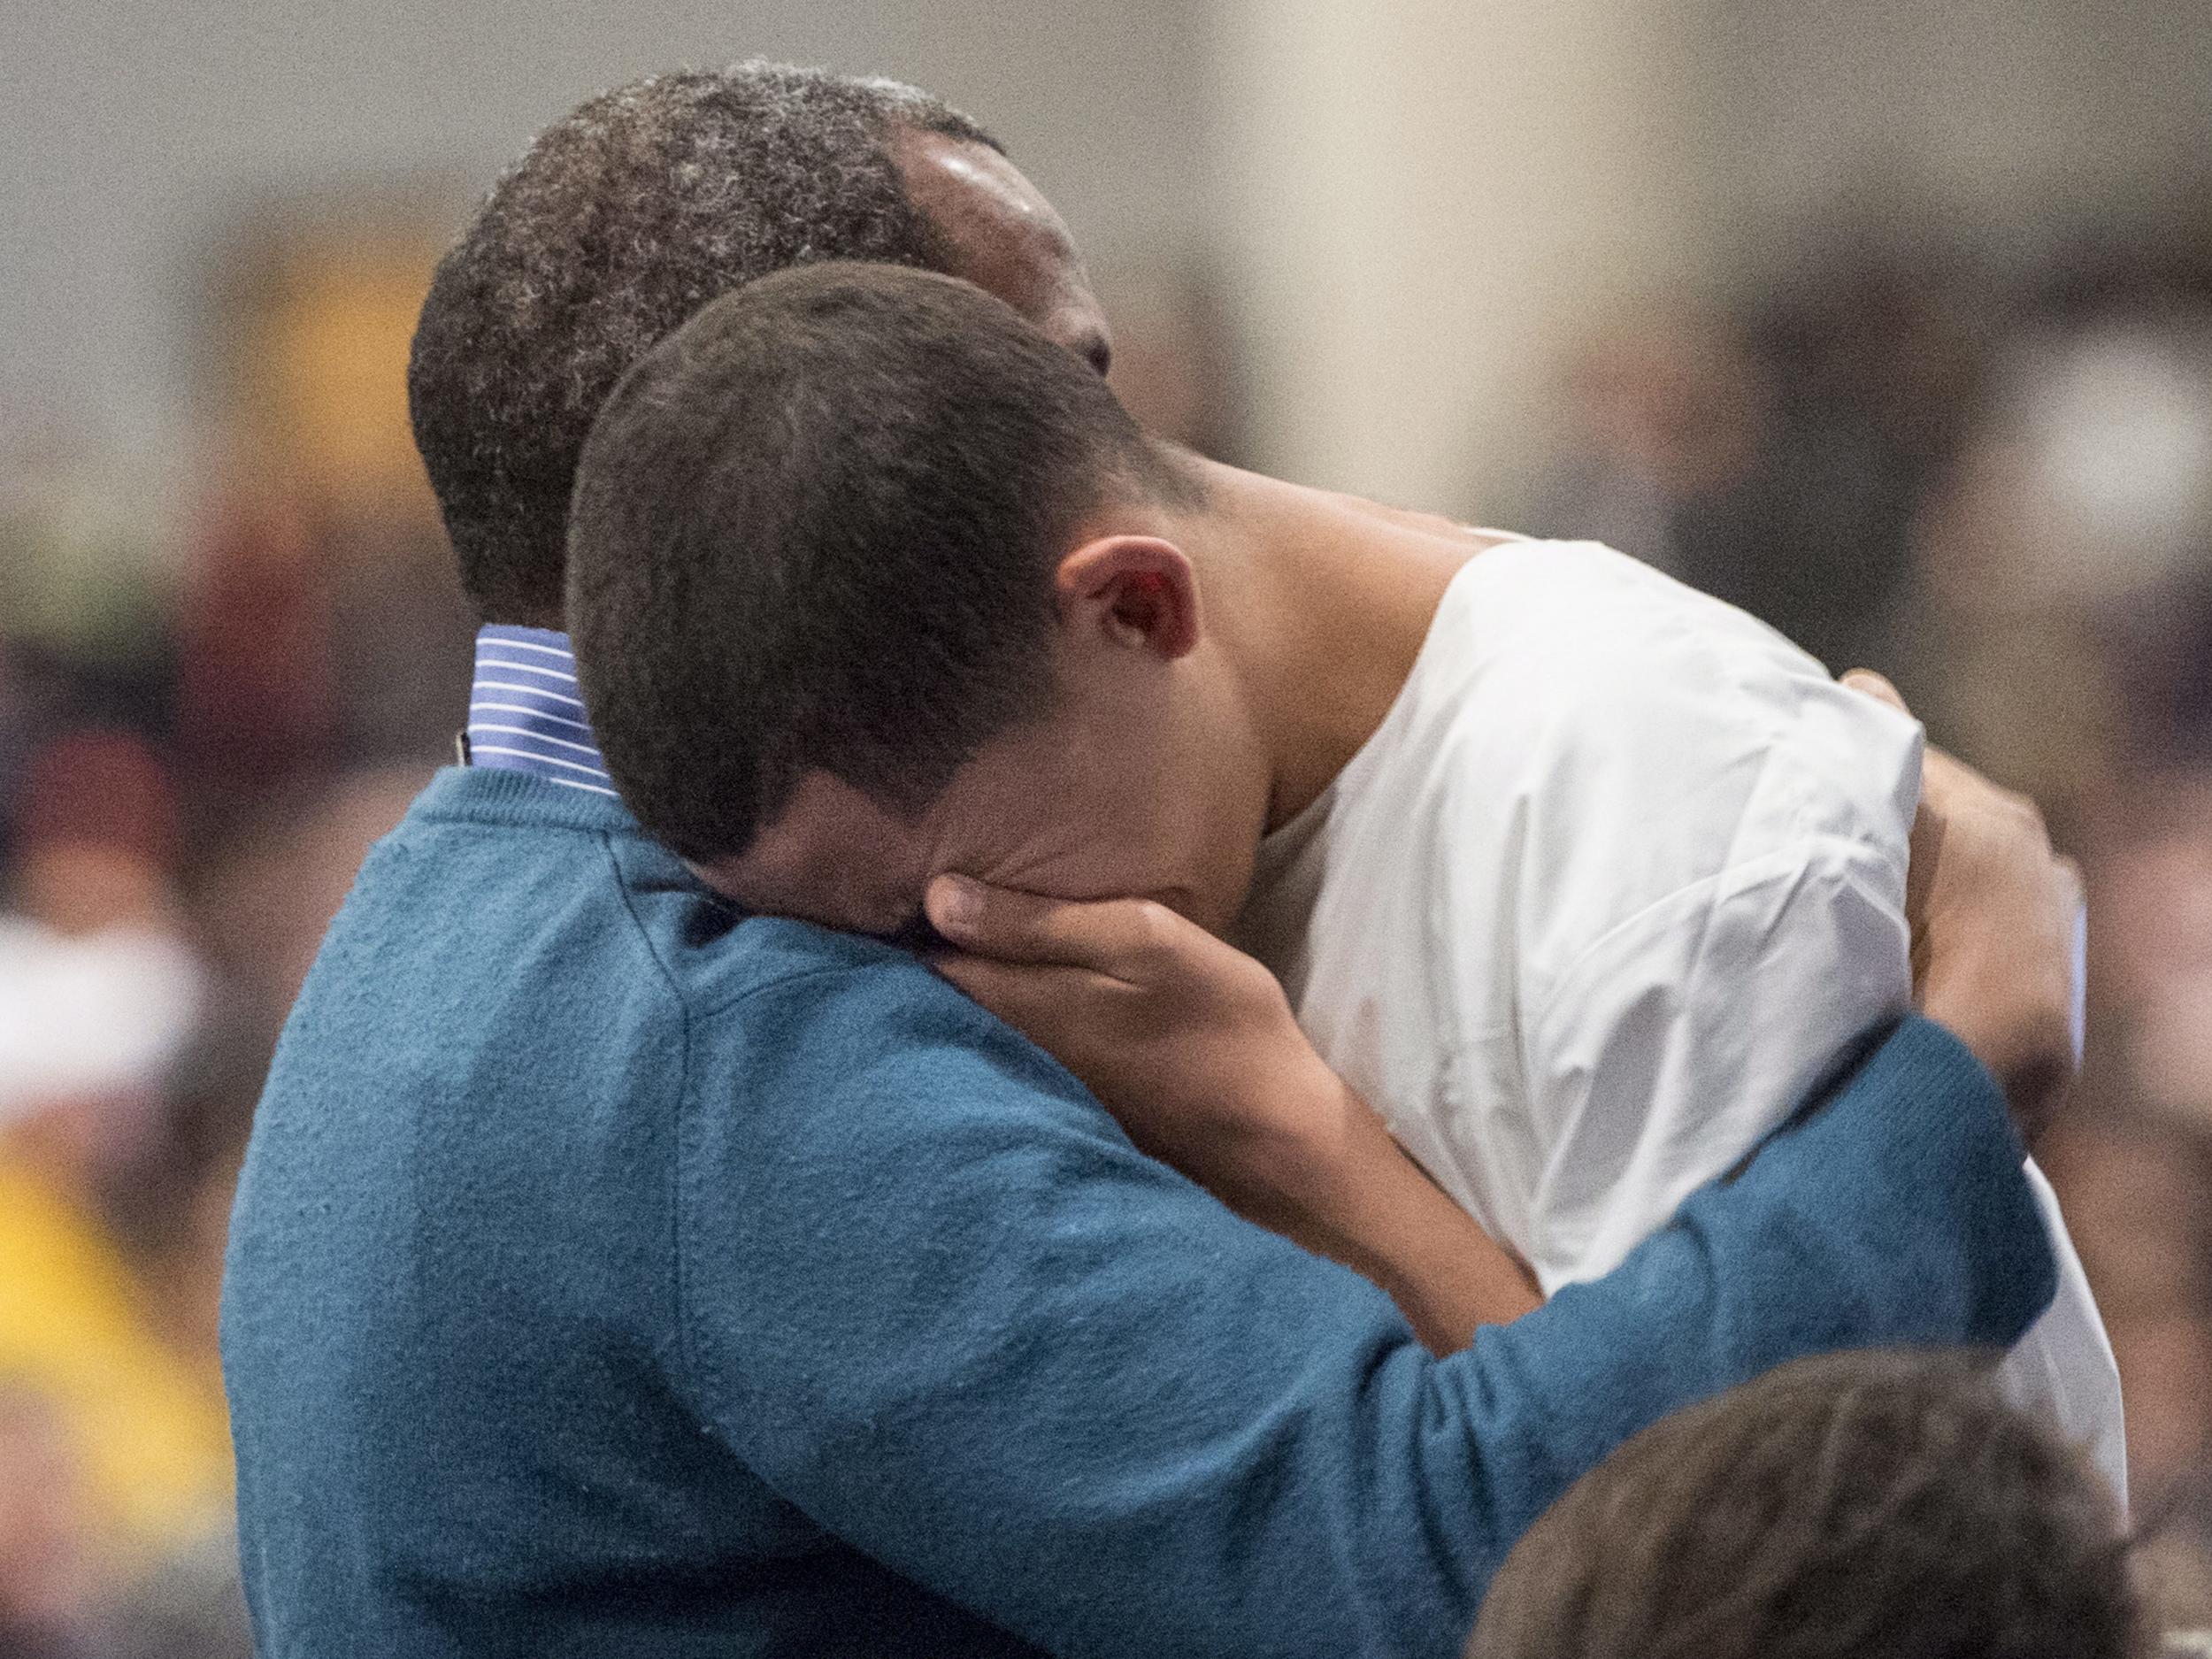 Ilies Soufiane, fifteen year old son of victim Azzeddine Soufiane, is consoled during a ceremony for three of the six victims of the Quebec City mosque shooting